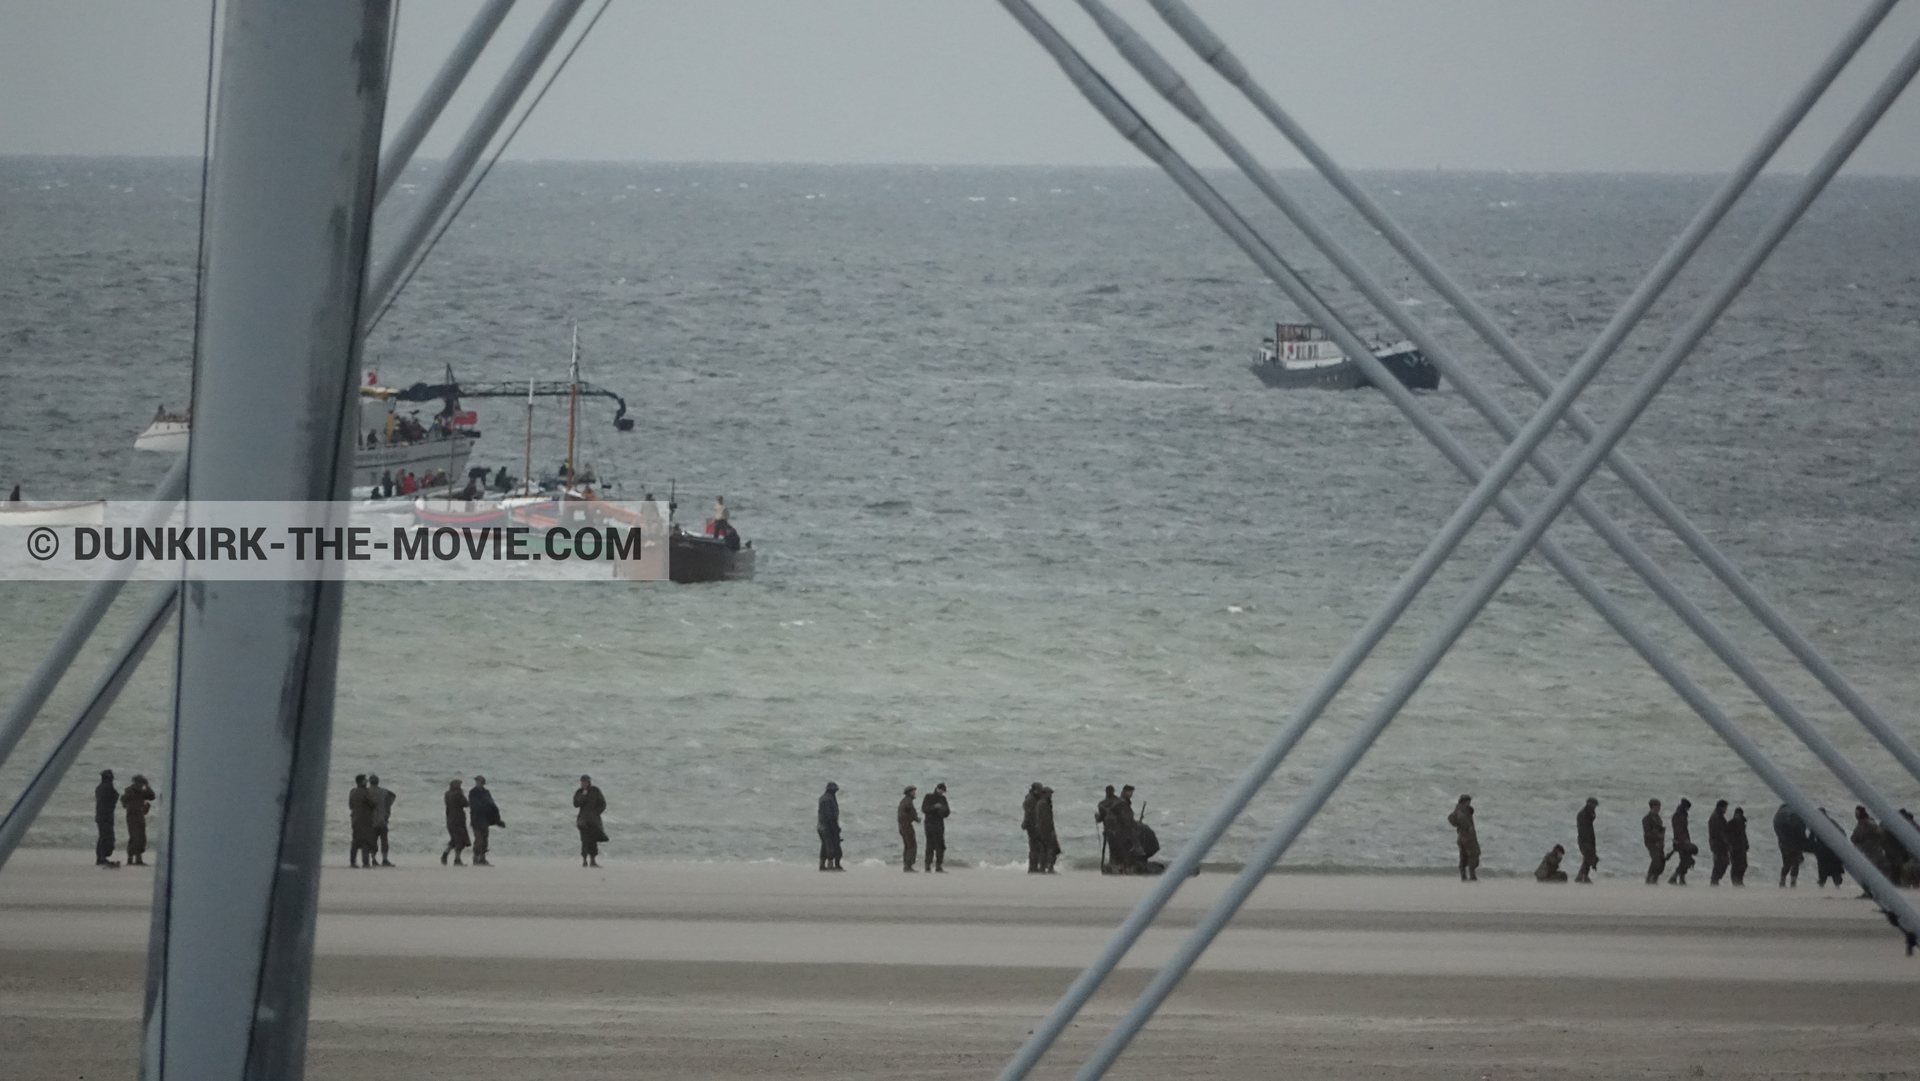 Picture with boat, supernumeraries, Ocean Wind 4, beach,  from behind the scene of the Dunkirk movie by Nolan